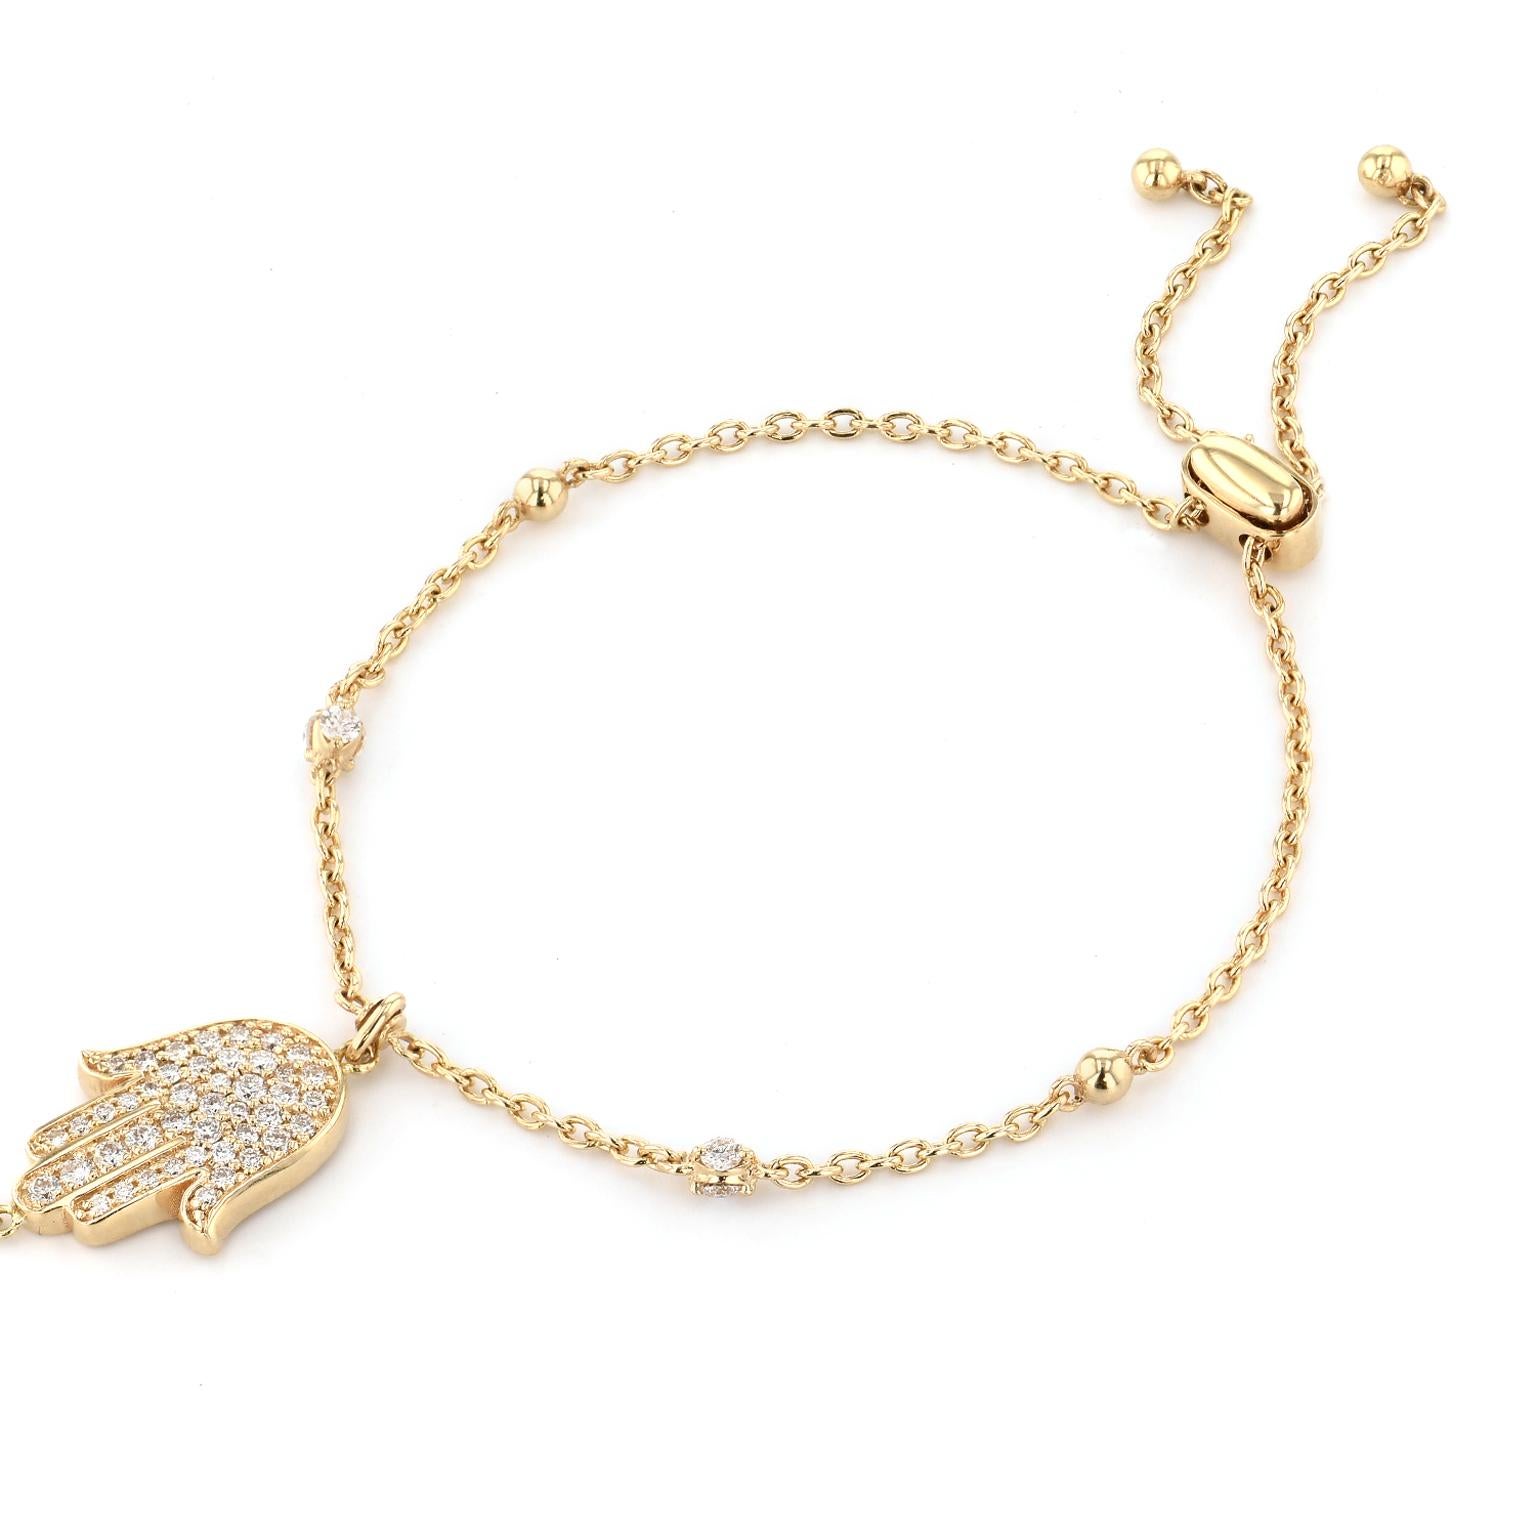 Hamsa Hand 14 karat Yellow Gold and Diamond Chain Bracelet with Ring Attachment

Add luck to your style, with this pave set diamond Hamsa Hand, held in a dainty diamond accented 14 karat yellow gold chain with a slip clasp and a ring chain for an